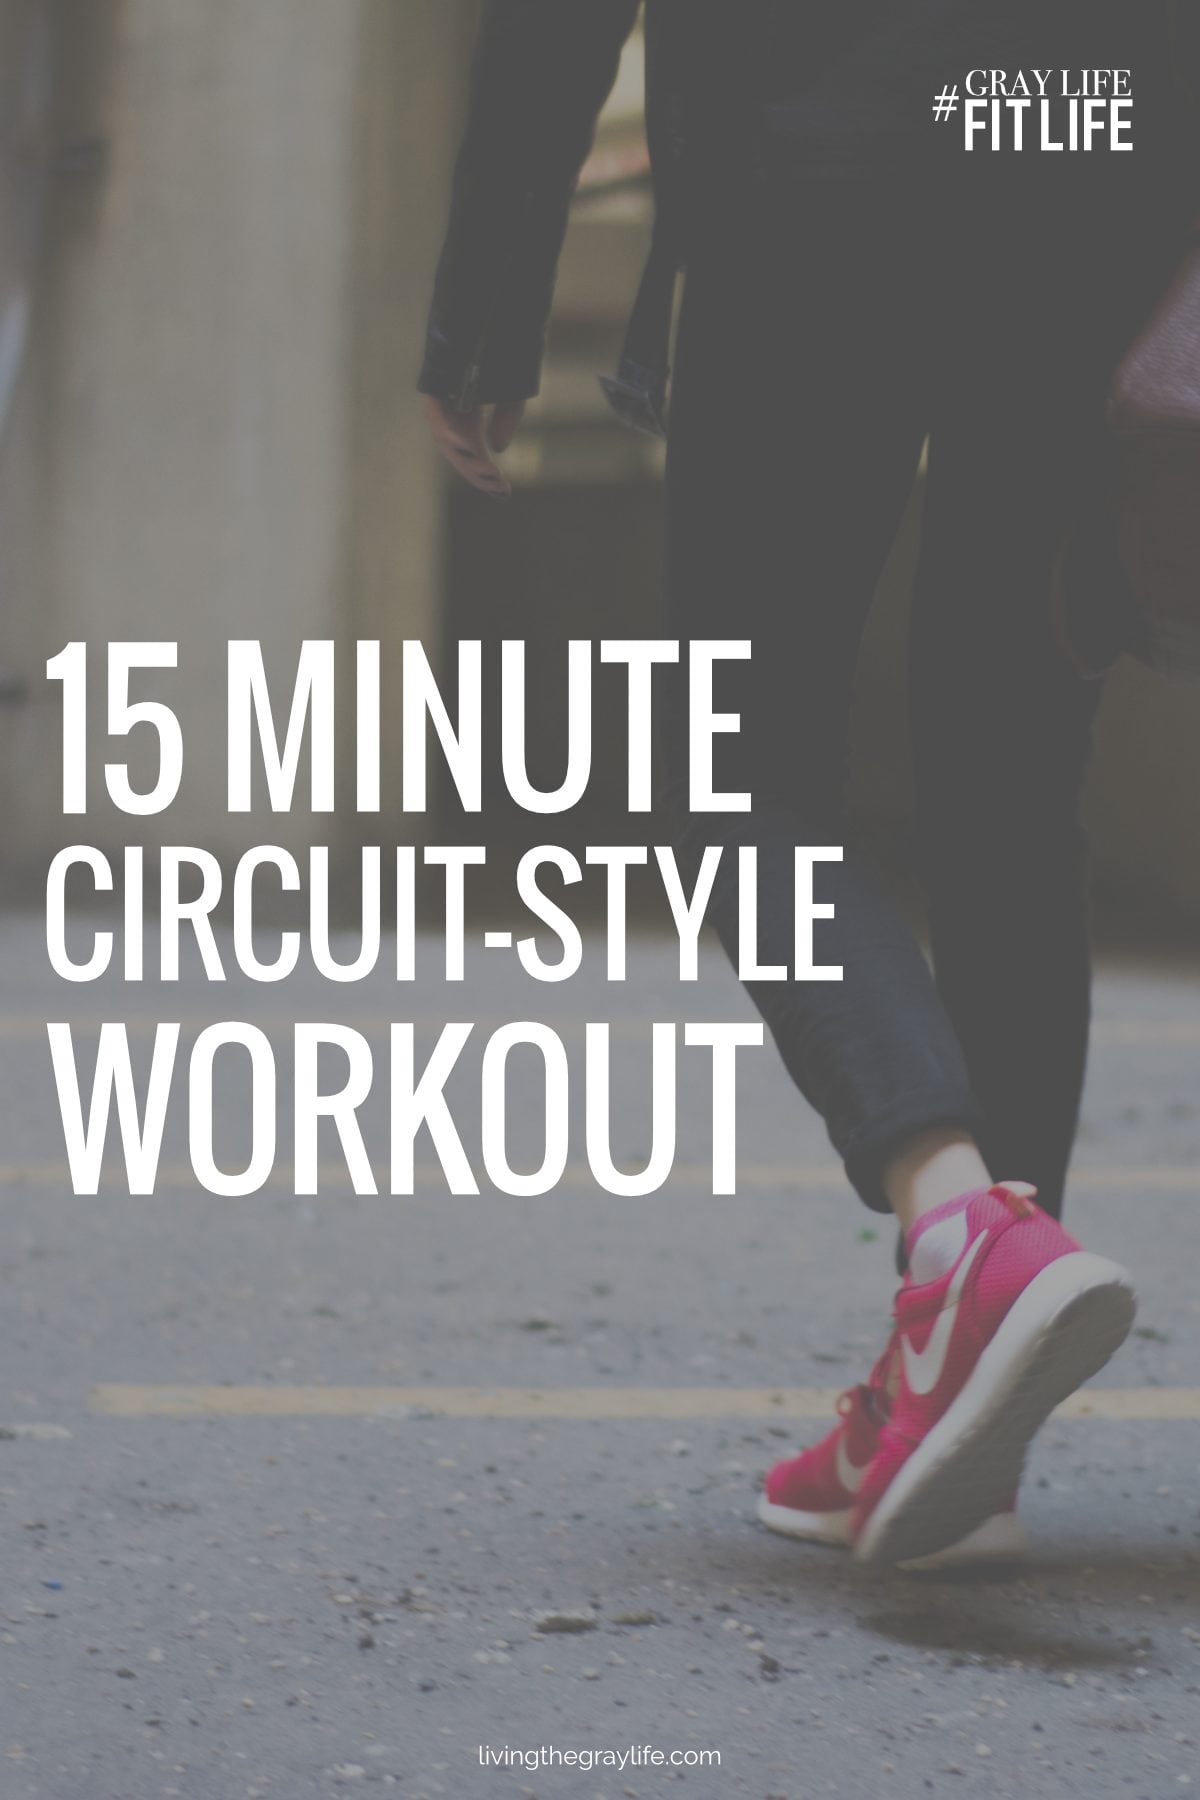 15 Minute Circuit-Style Workout